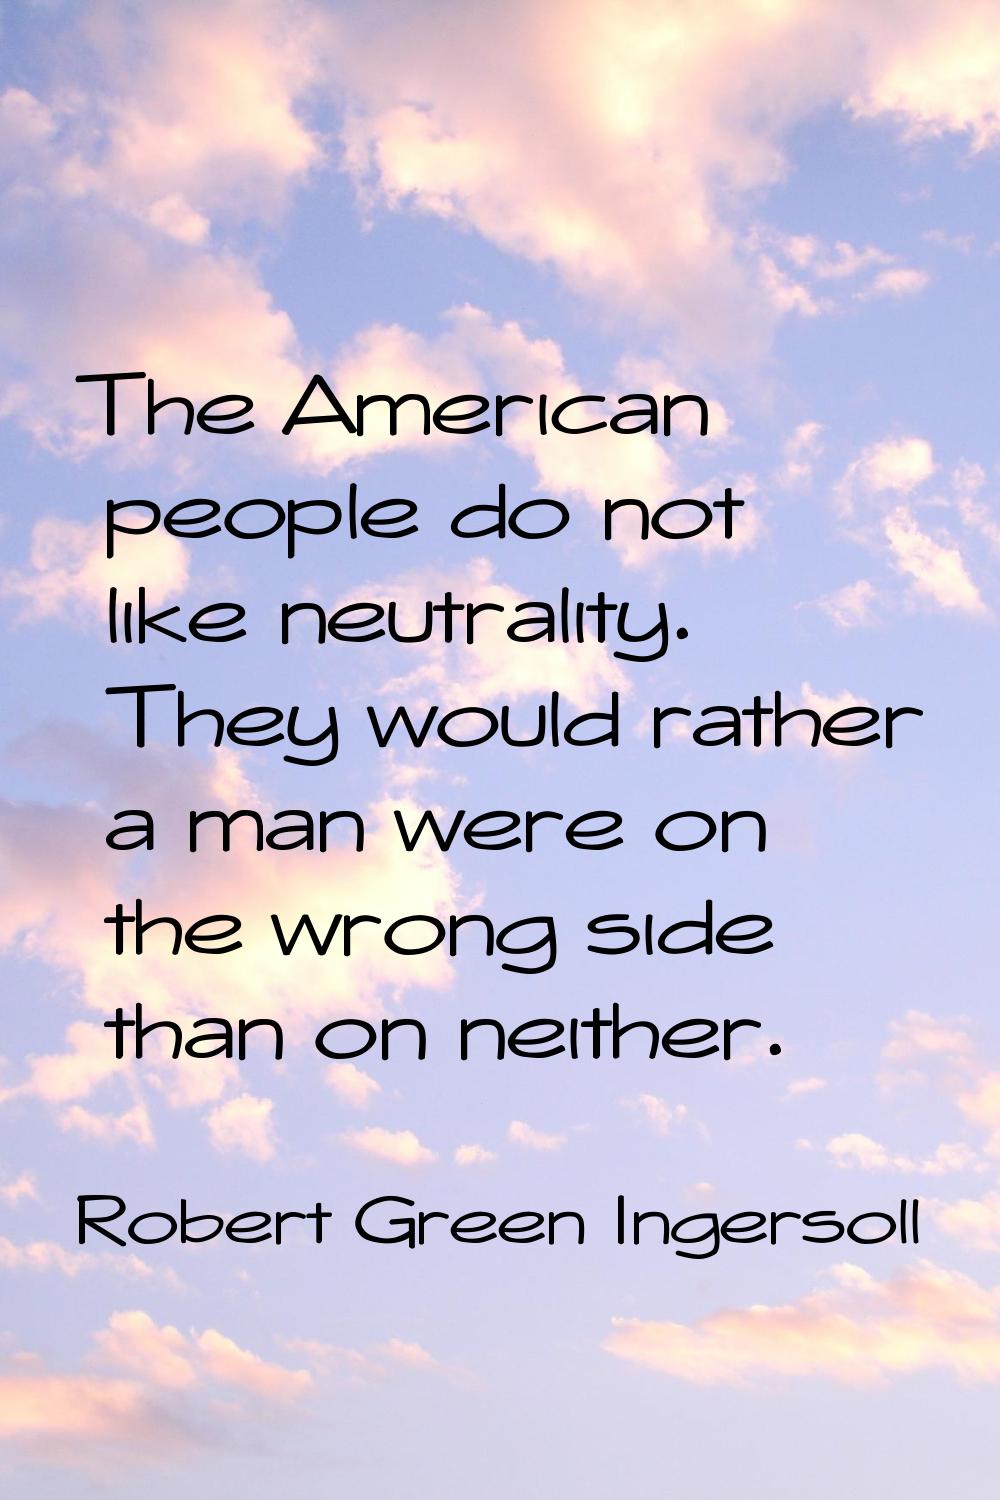 The American people do not like neutrality. They would rather a man were on the wrong side than on 